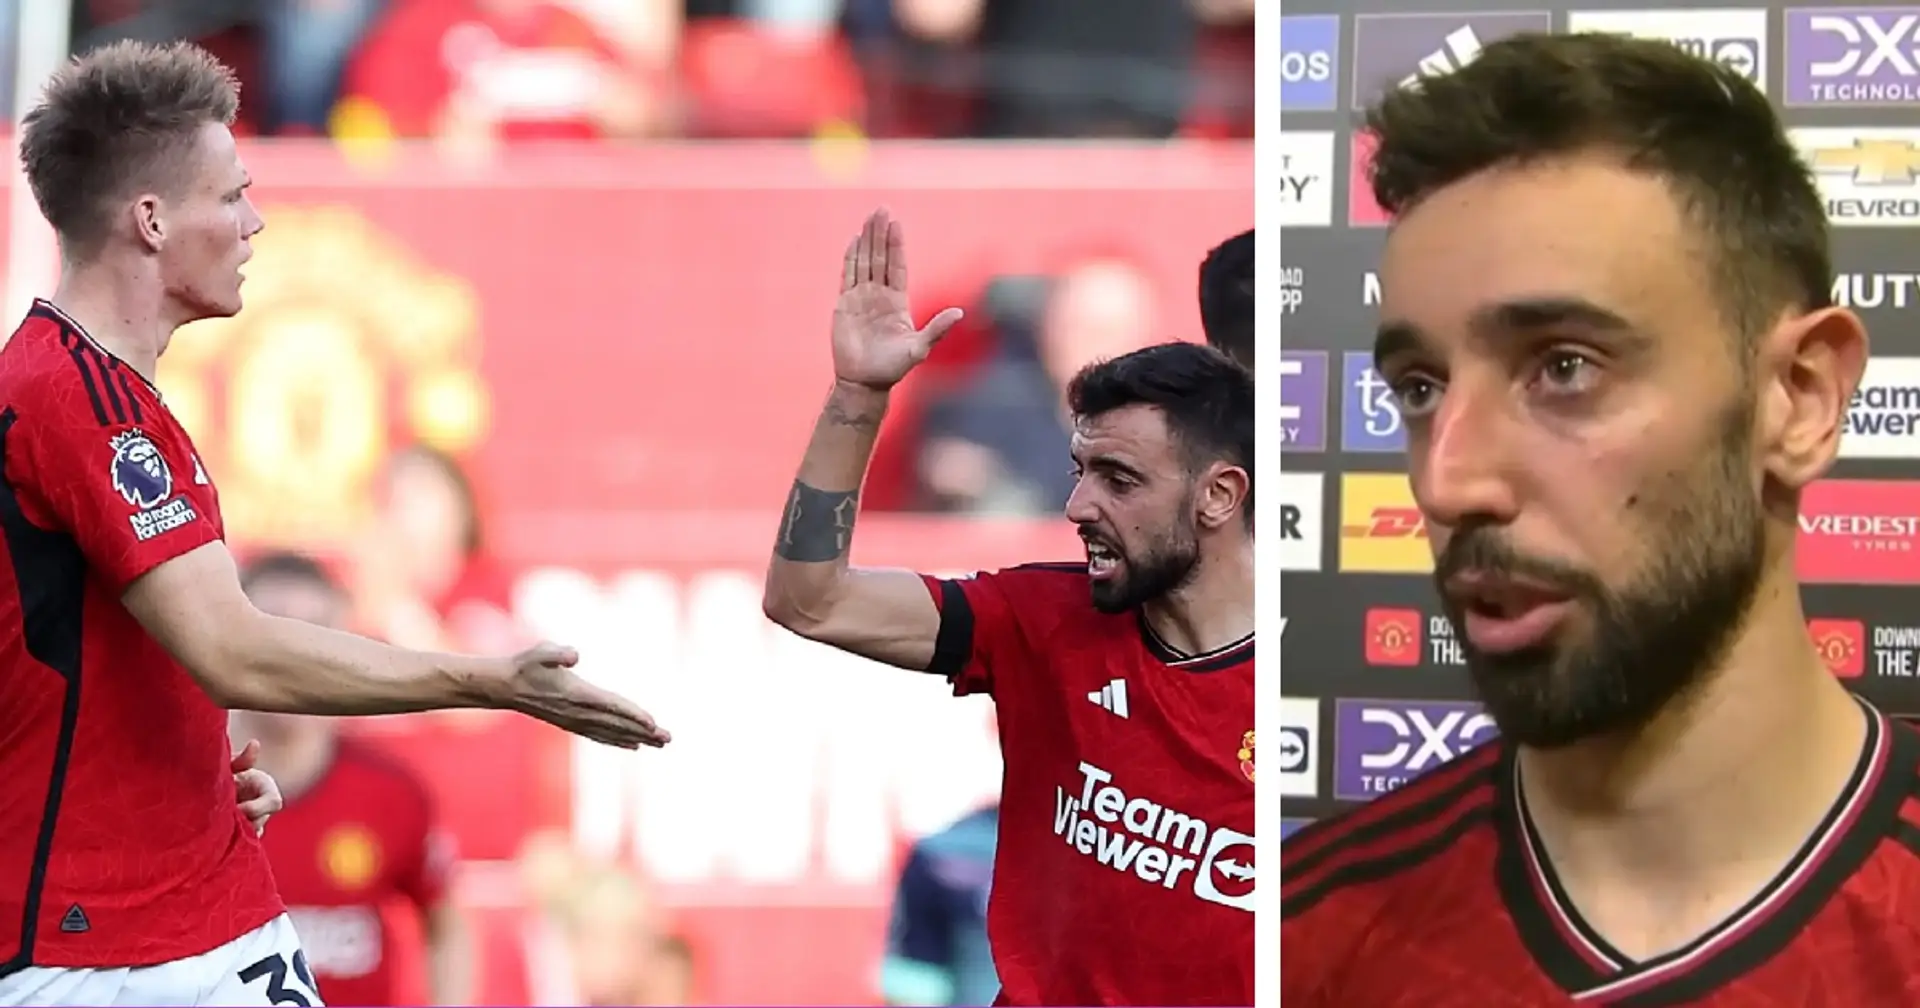 Bruno Fernandes sends message to McTominay about lack of game time